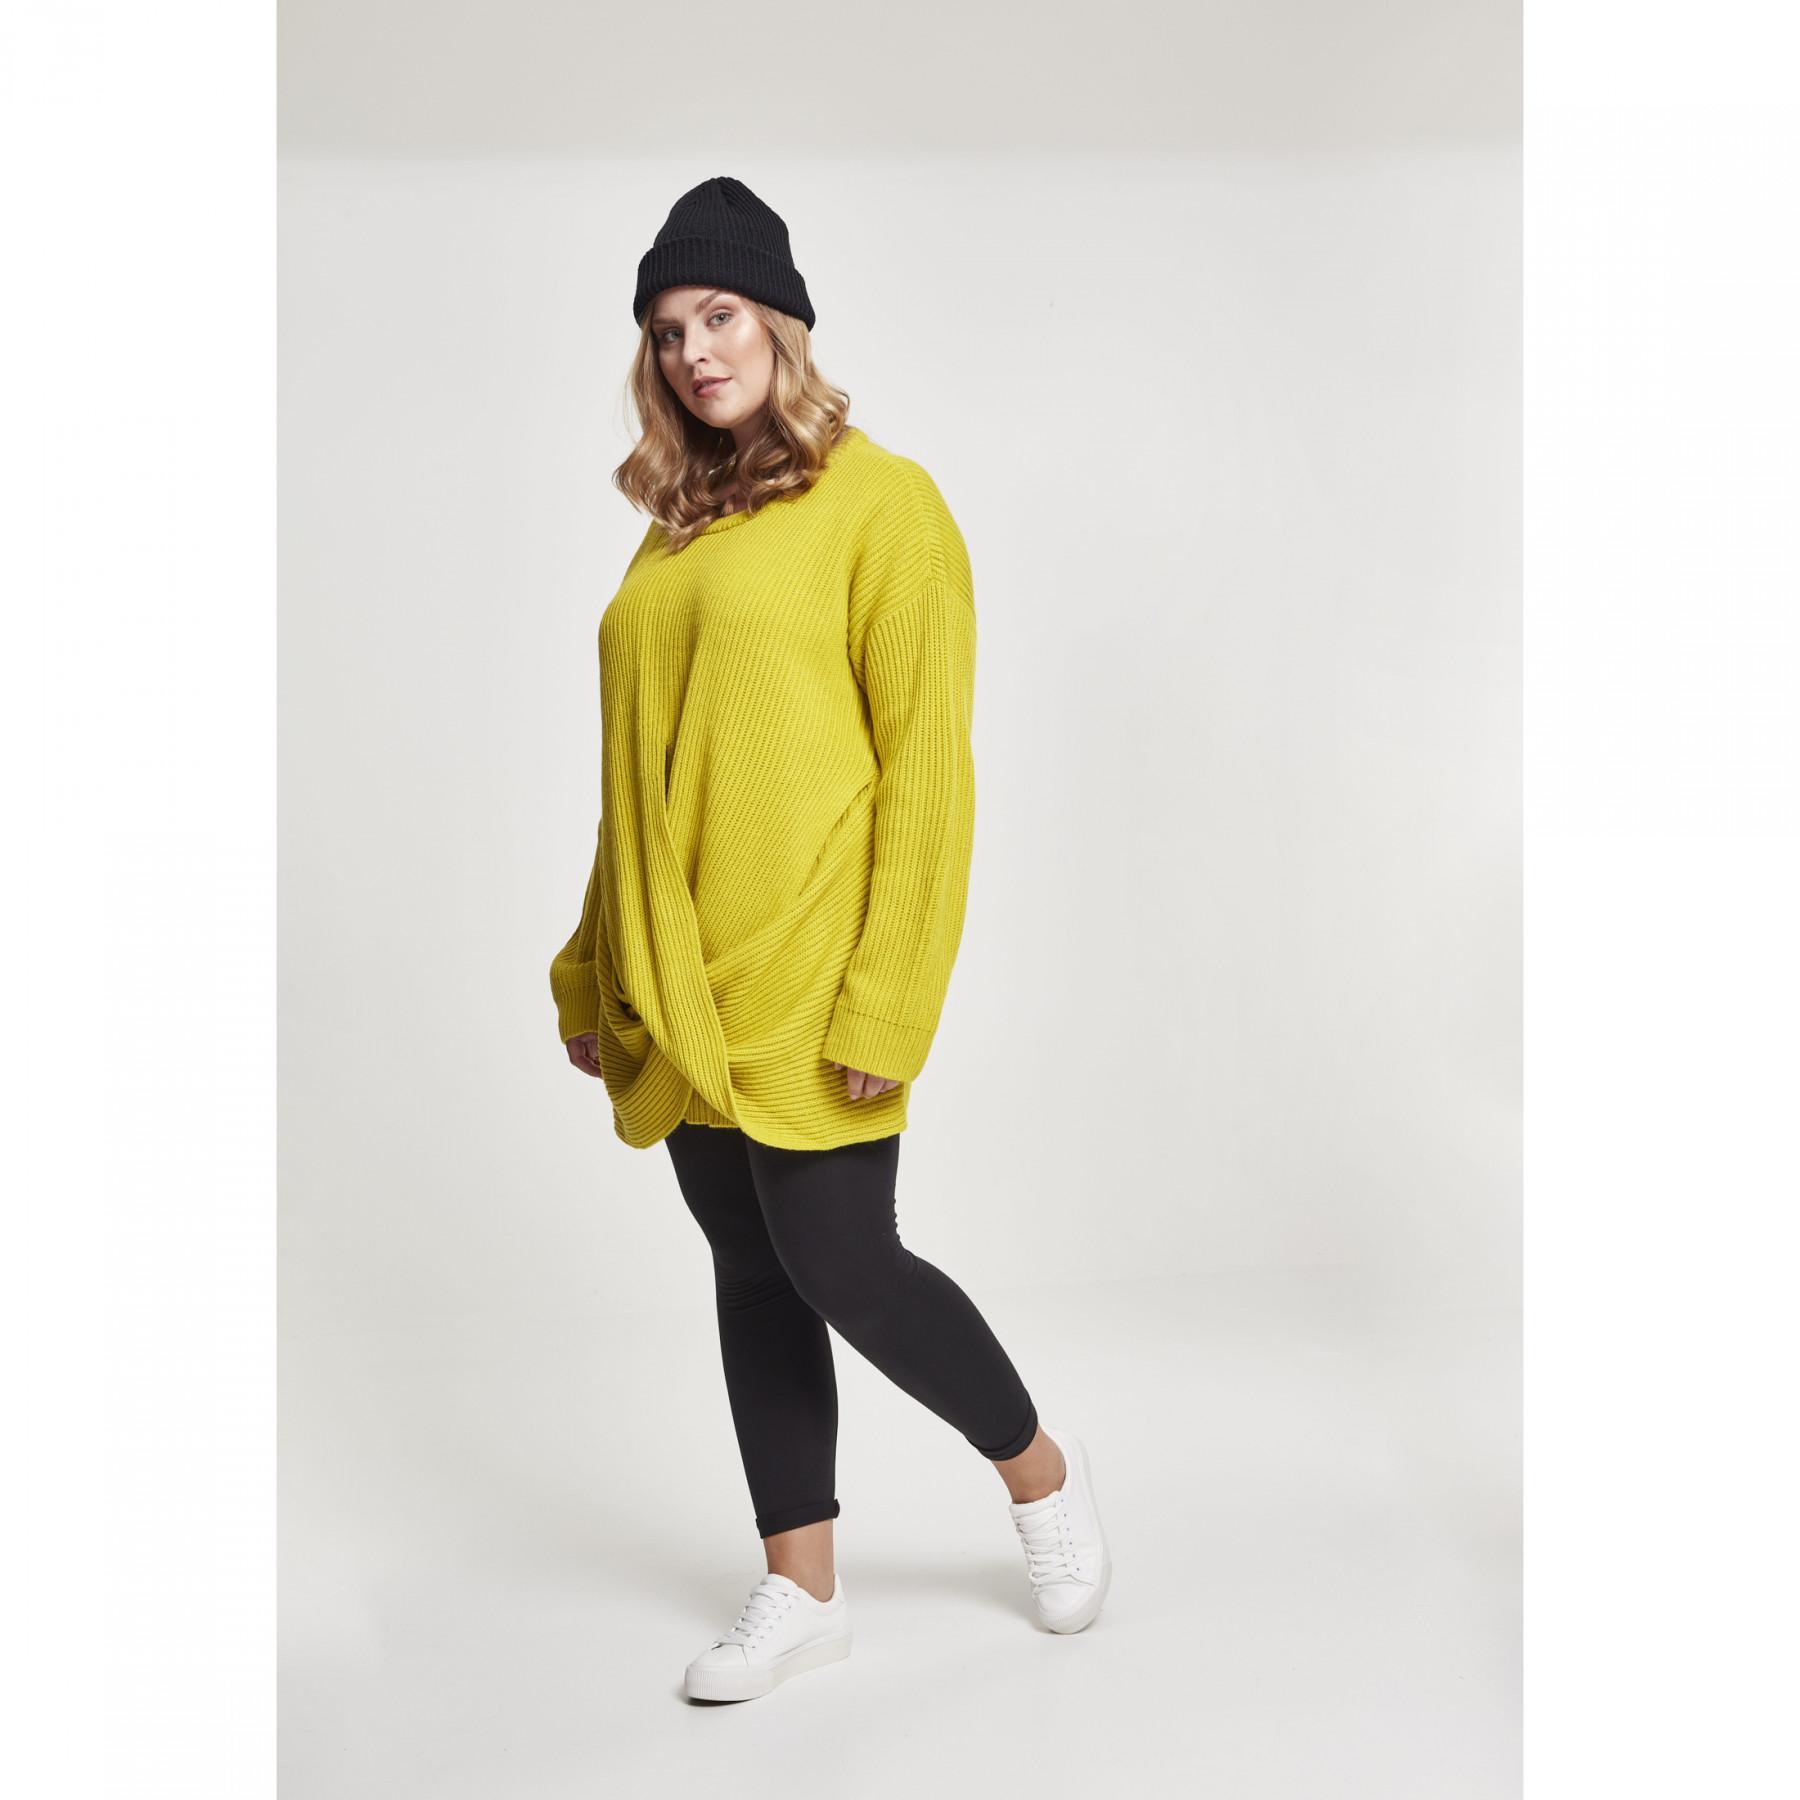 Sweatshirt femme grandes tailles Urban Classic wrapped